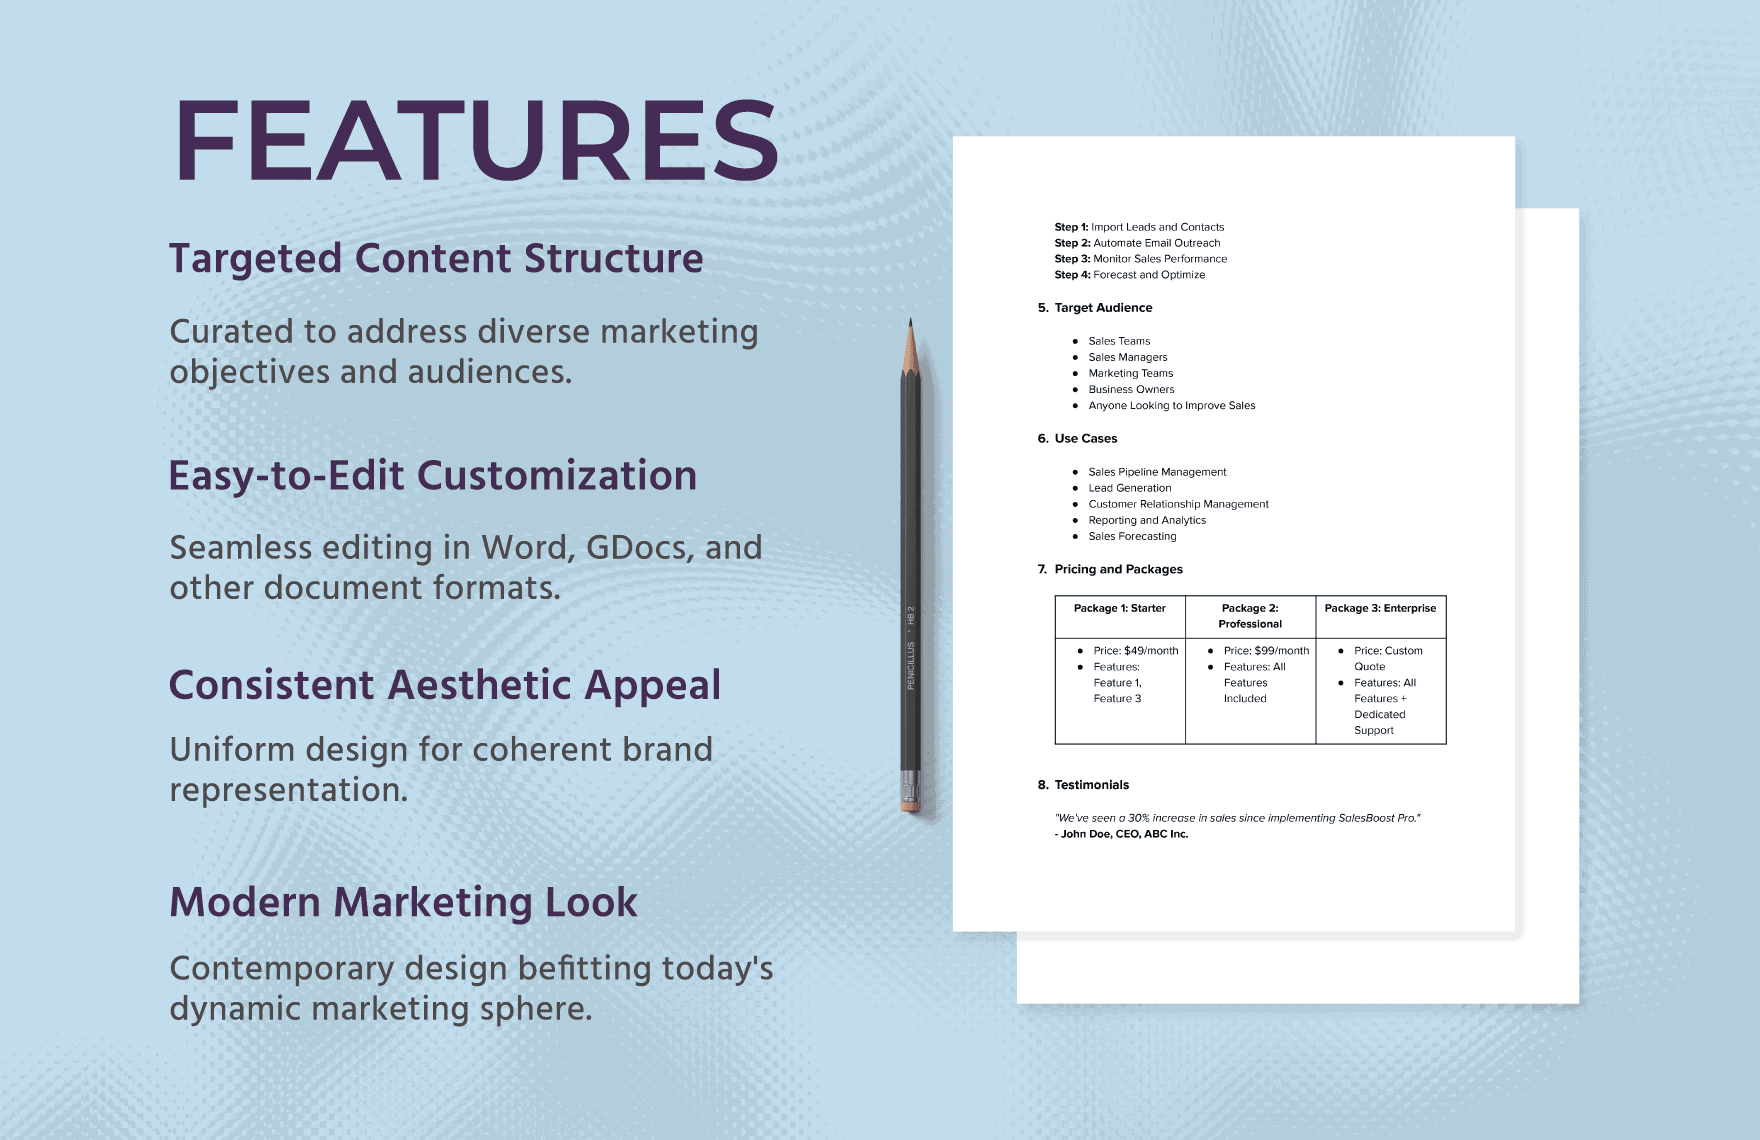 Marketing Product Brochure Outline Template